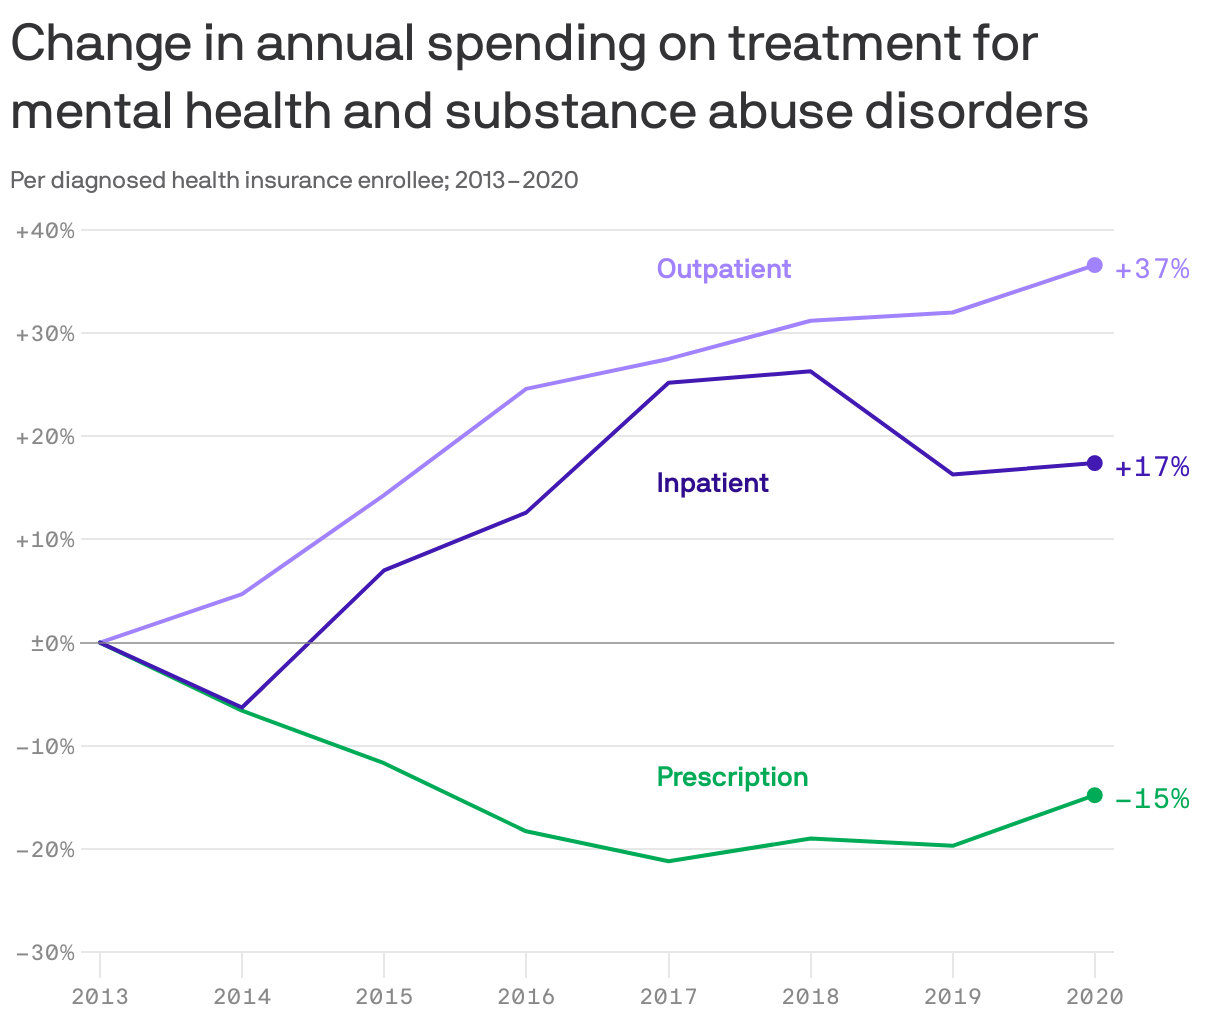 Change in annual spending on mental health and substance abuse